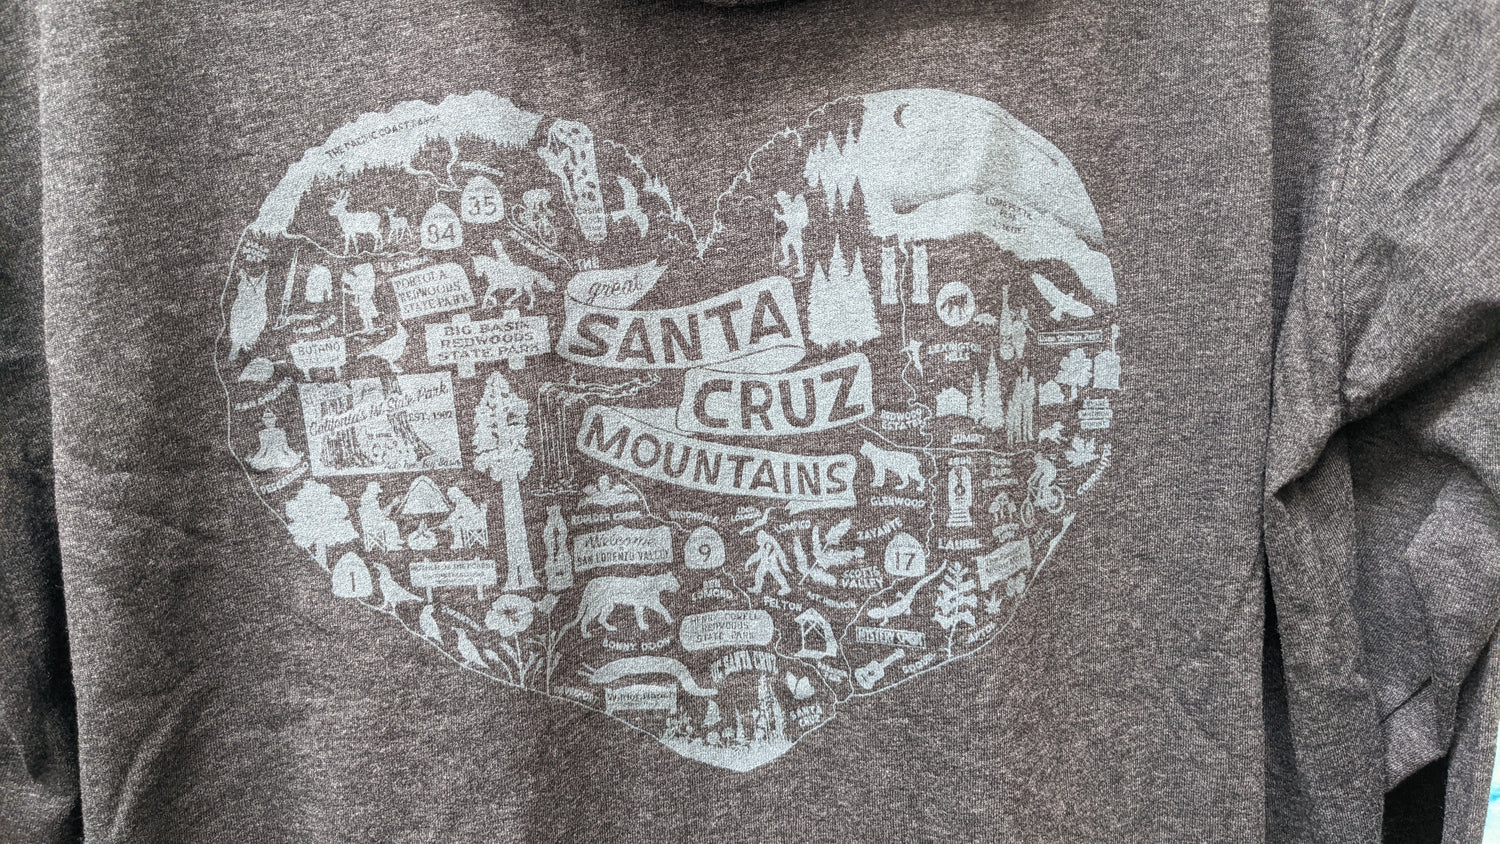 Close up of heart design by Great Santa Cruz Mountains